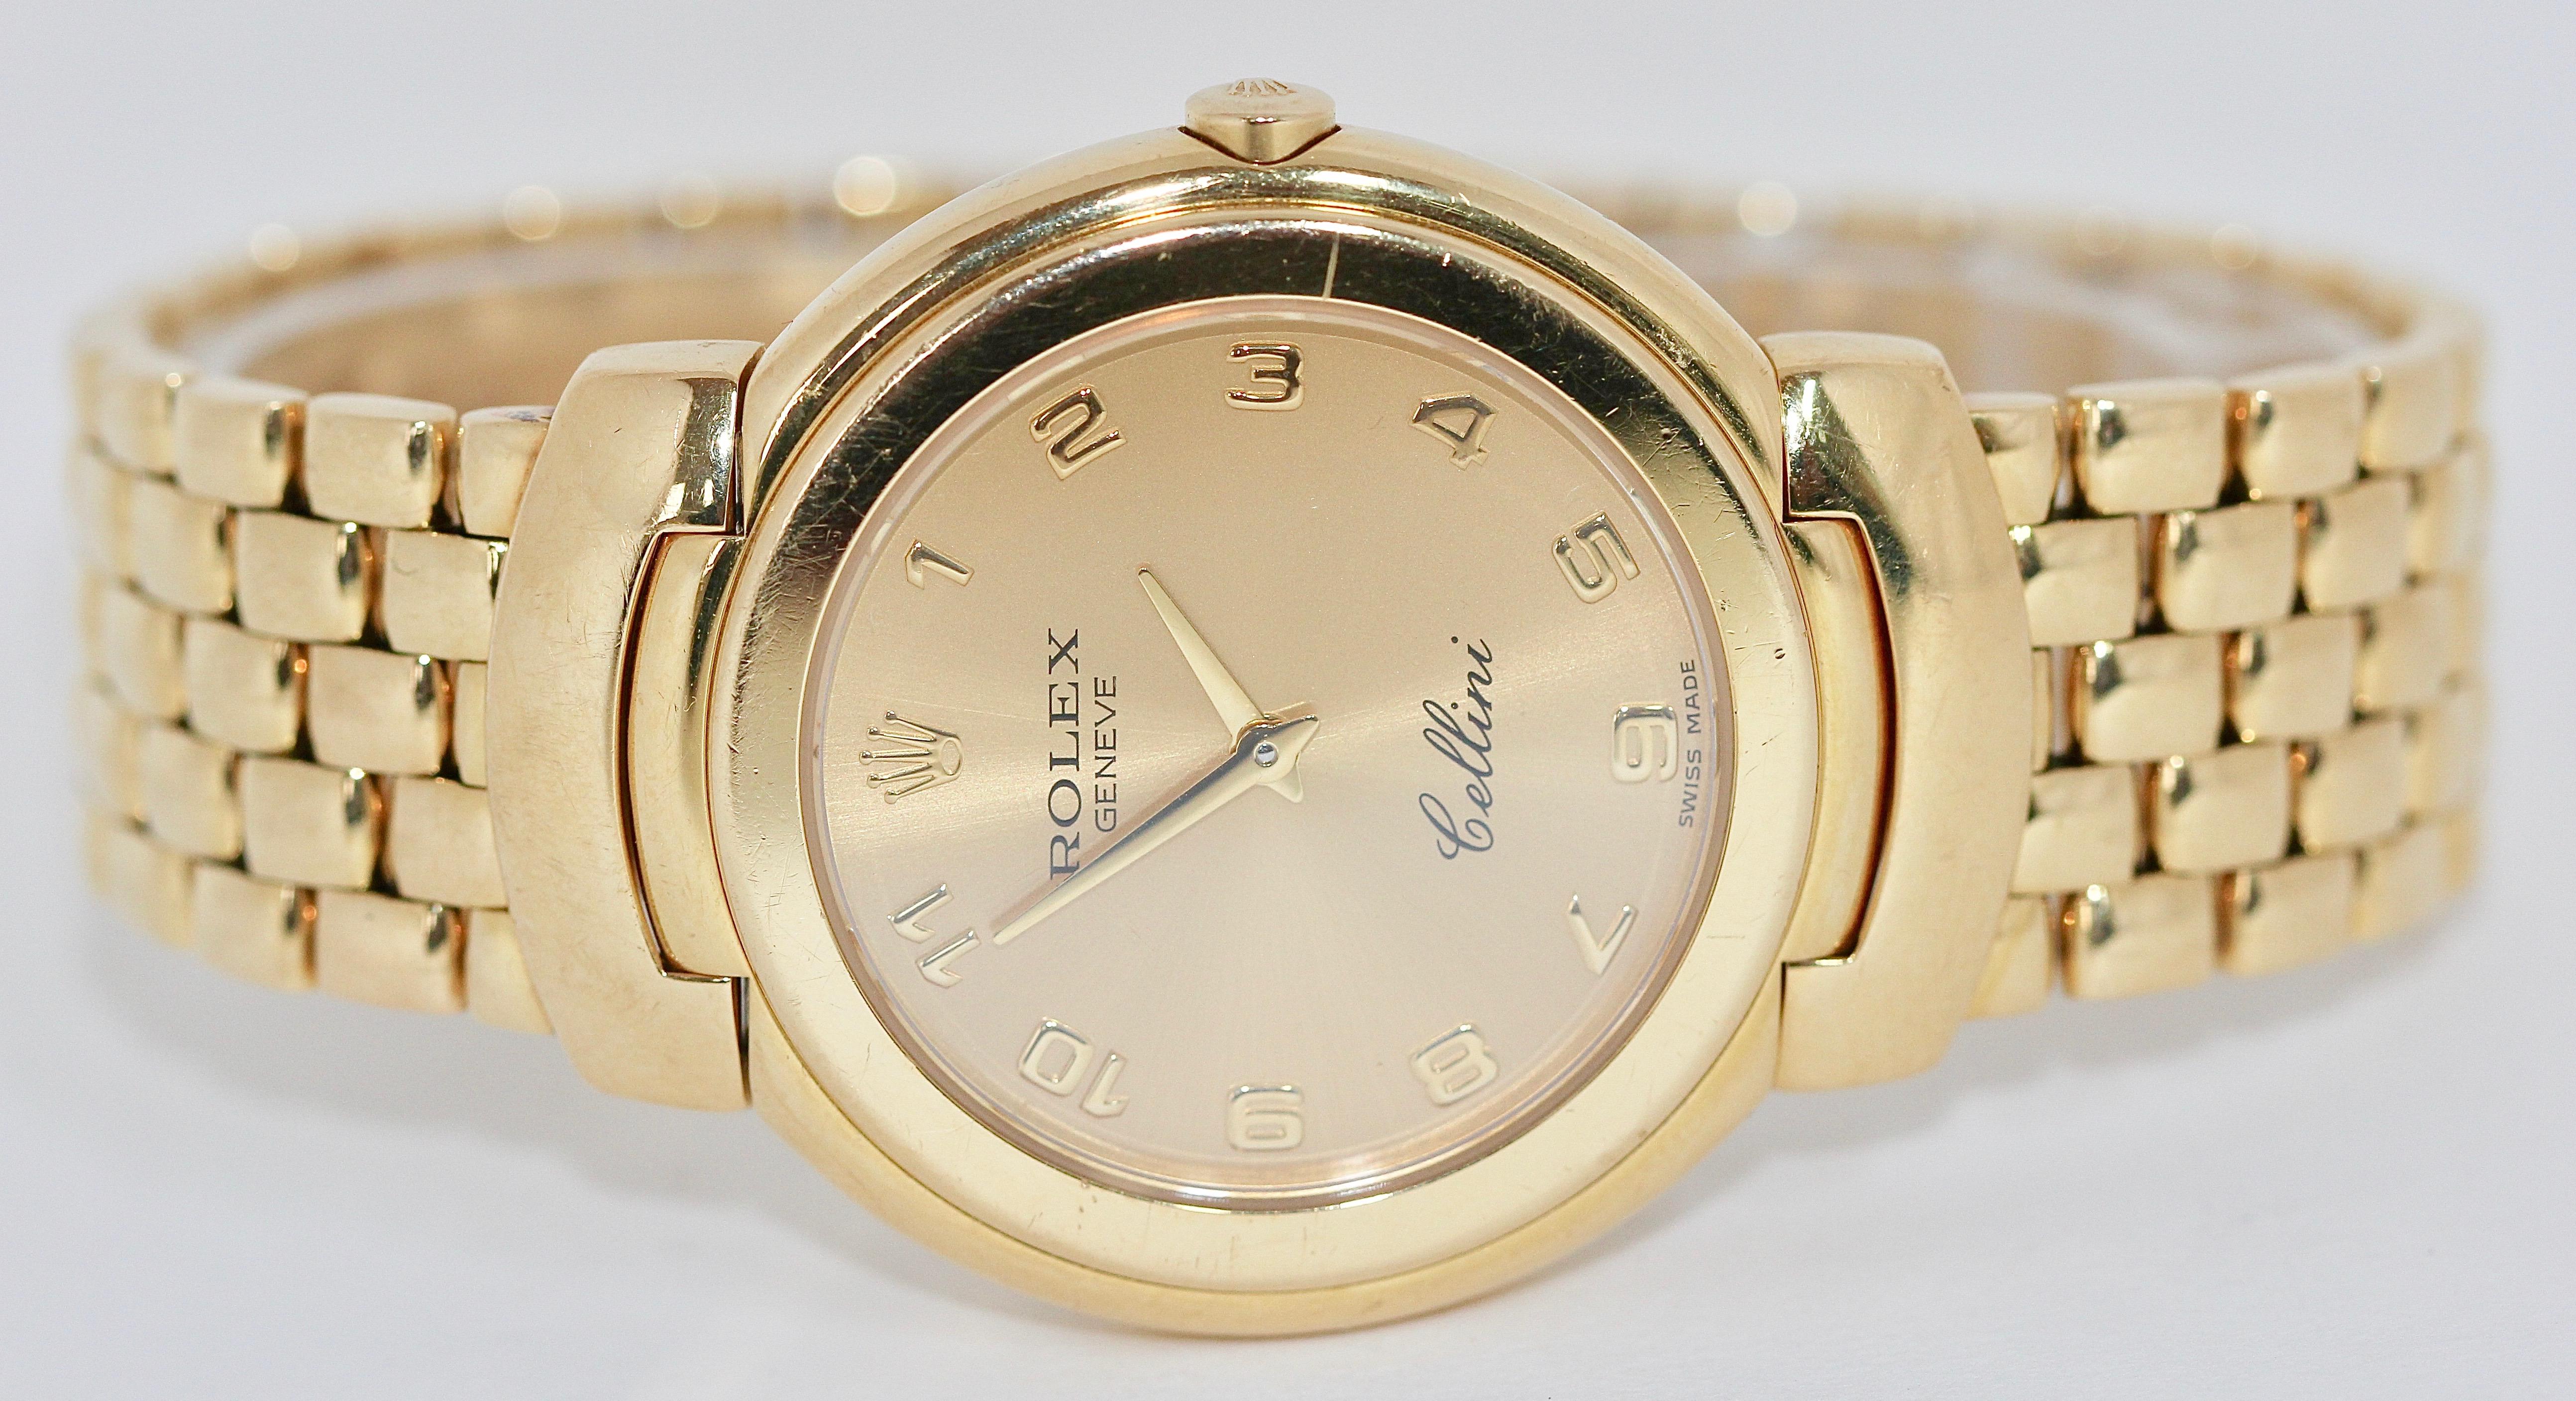 Rolex Cellini 6622 Lady 18k Yellow Gold - Quartz, 33mm

Of course, you will receive a detailed certificate for your documents in addition to the invoice for this watch!

The watch works perfectly. The watch receives a brand new battery before